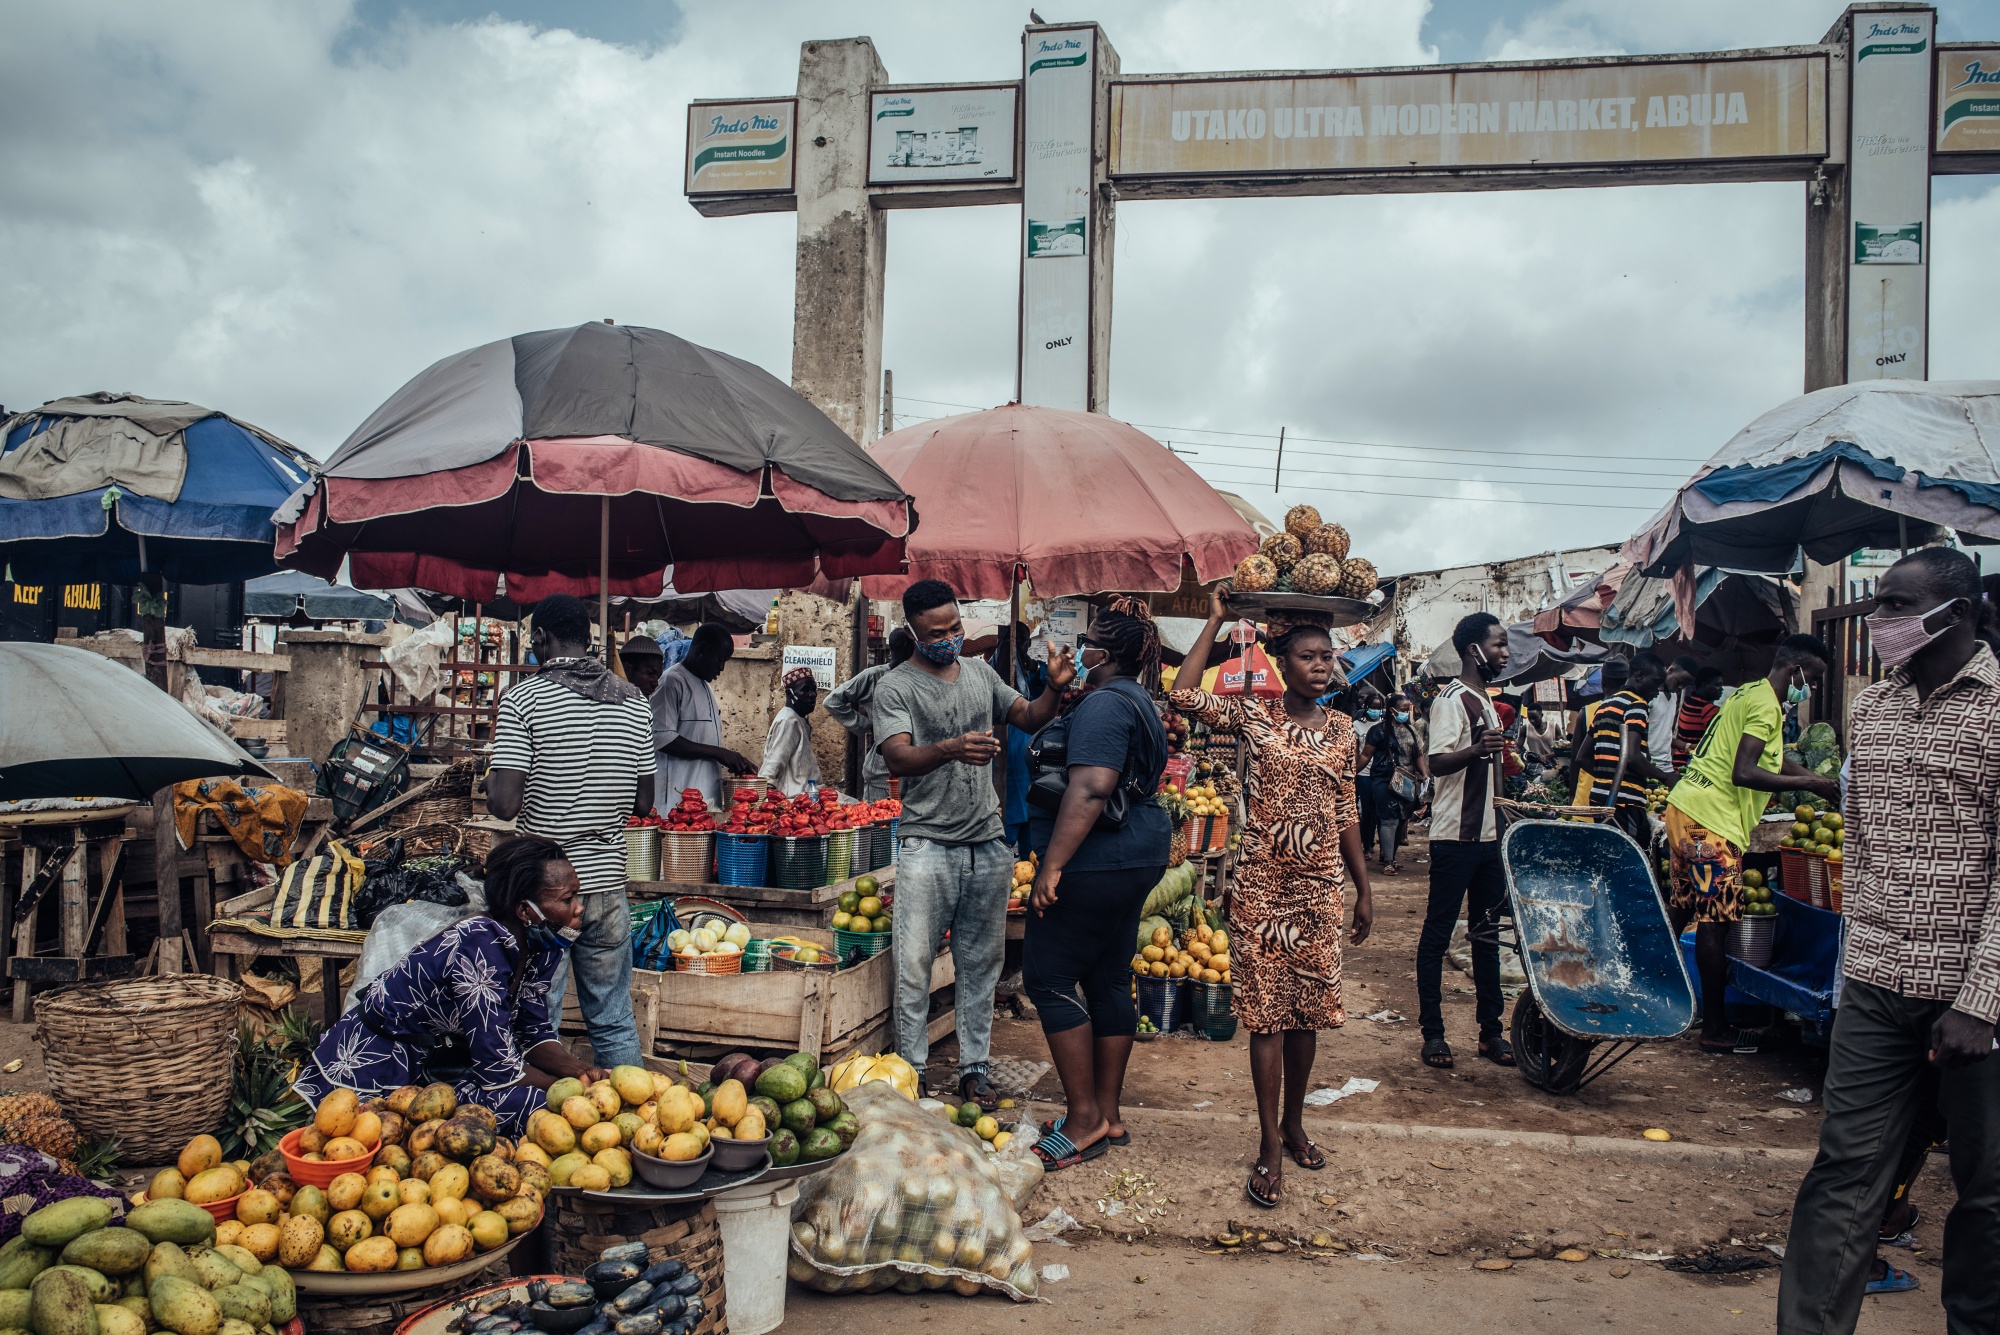 Vendors sell fresh produce at a market in Abuja.